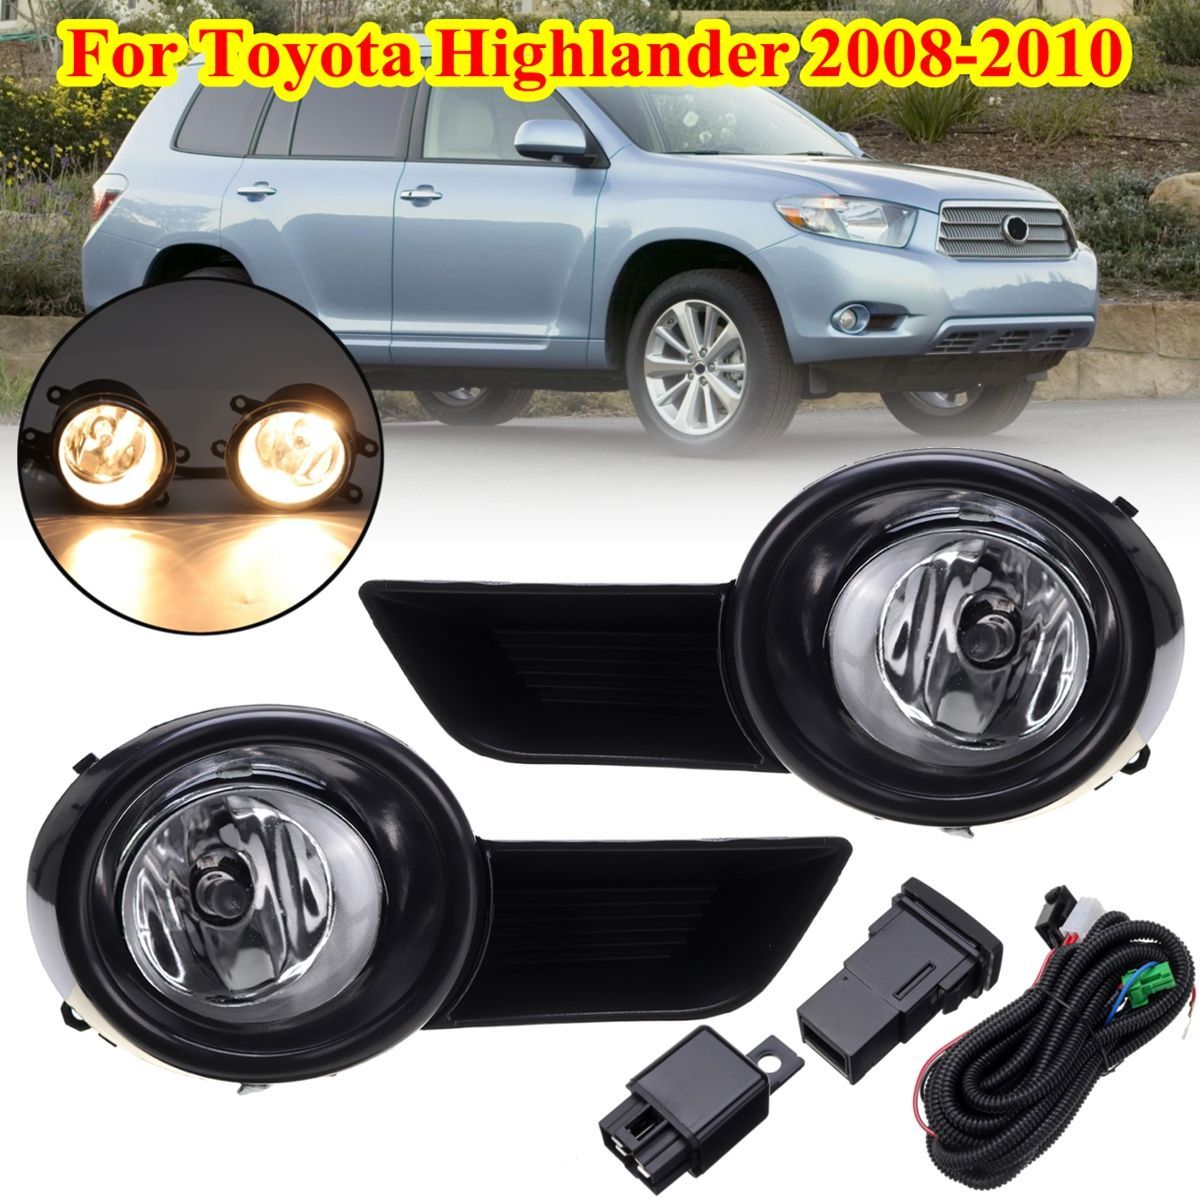 2Pcs-Car-Front-Bumper-Fog-Lights-Lamps-Grilles-With-Wiring-Harness-Covers-For-Toyota-Highlander-2008-1680518